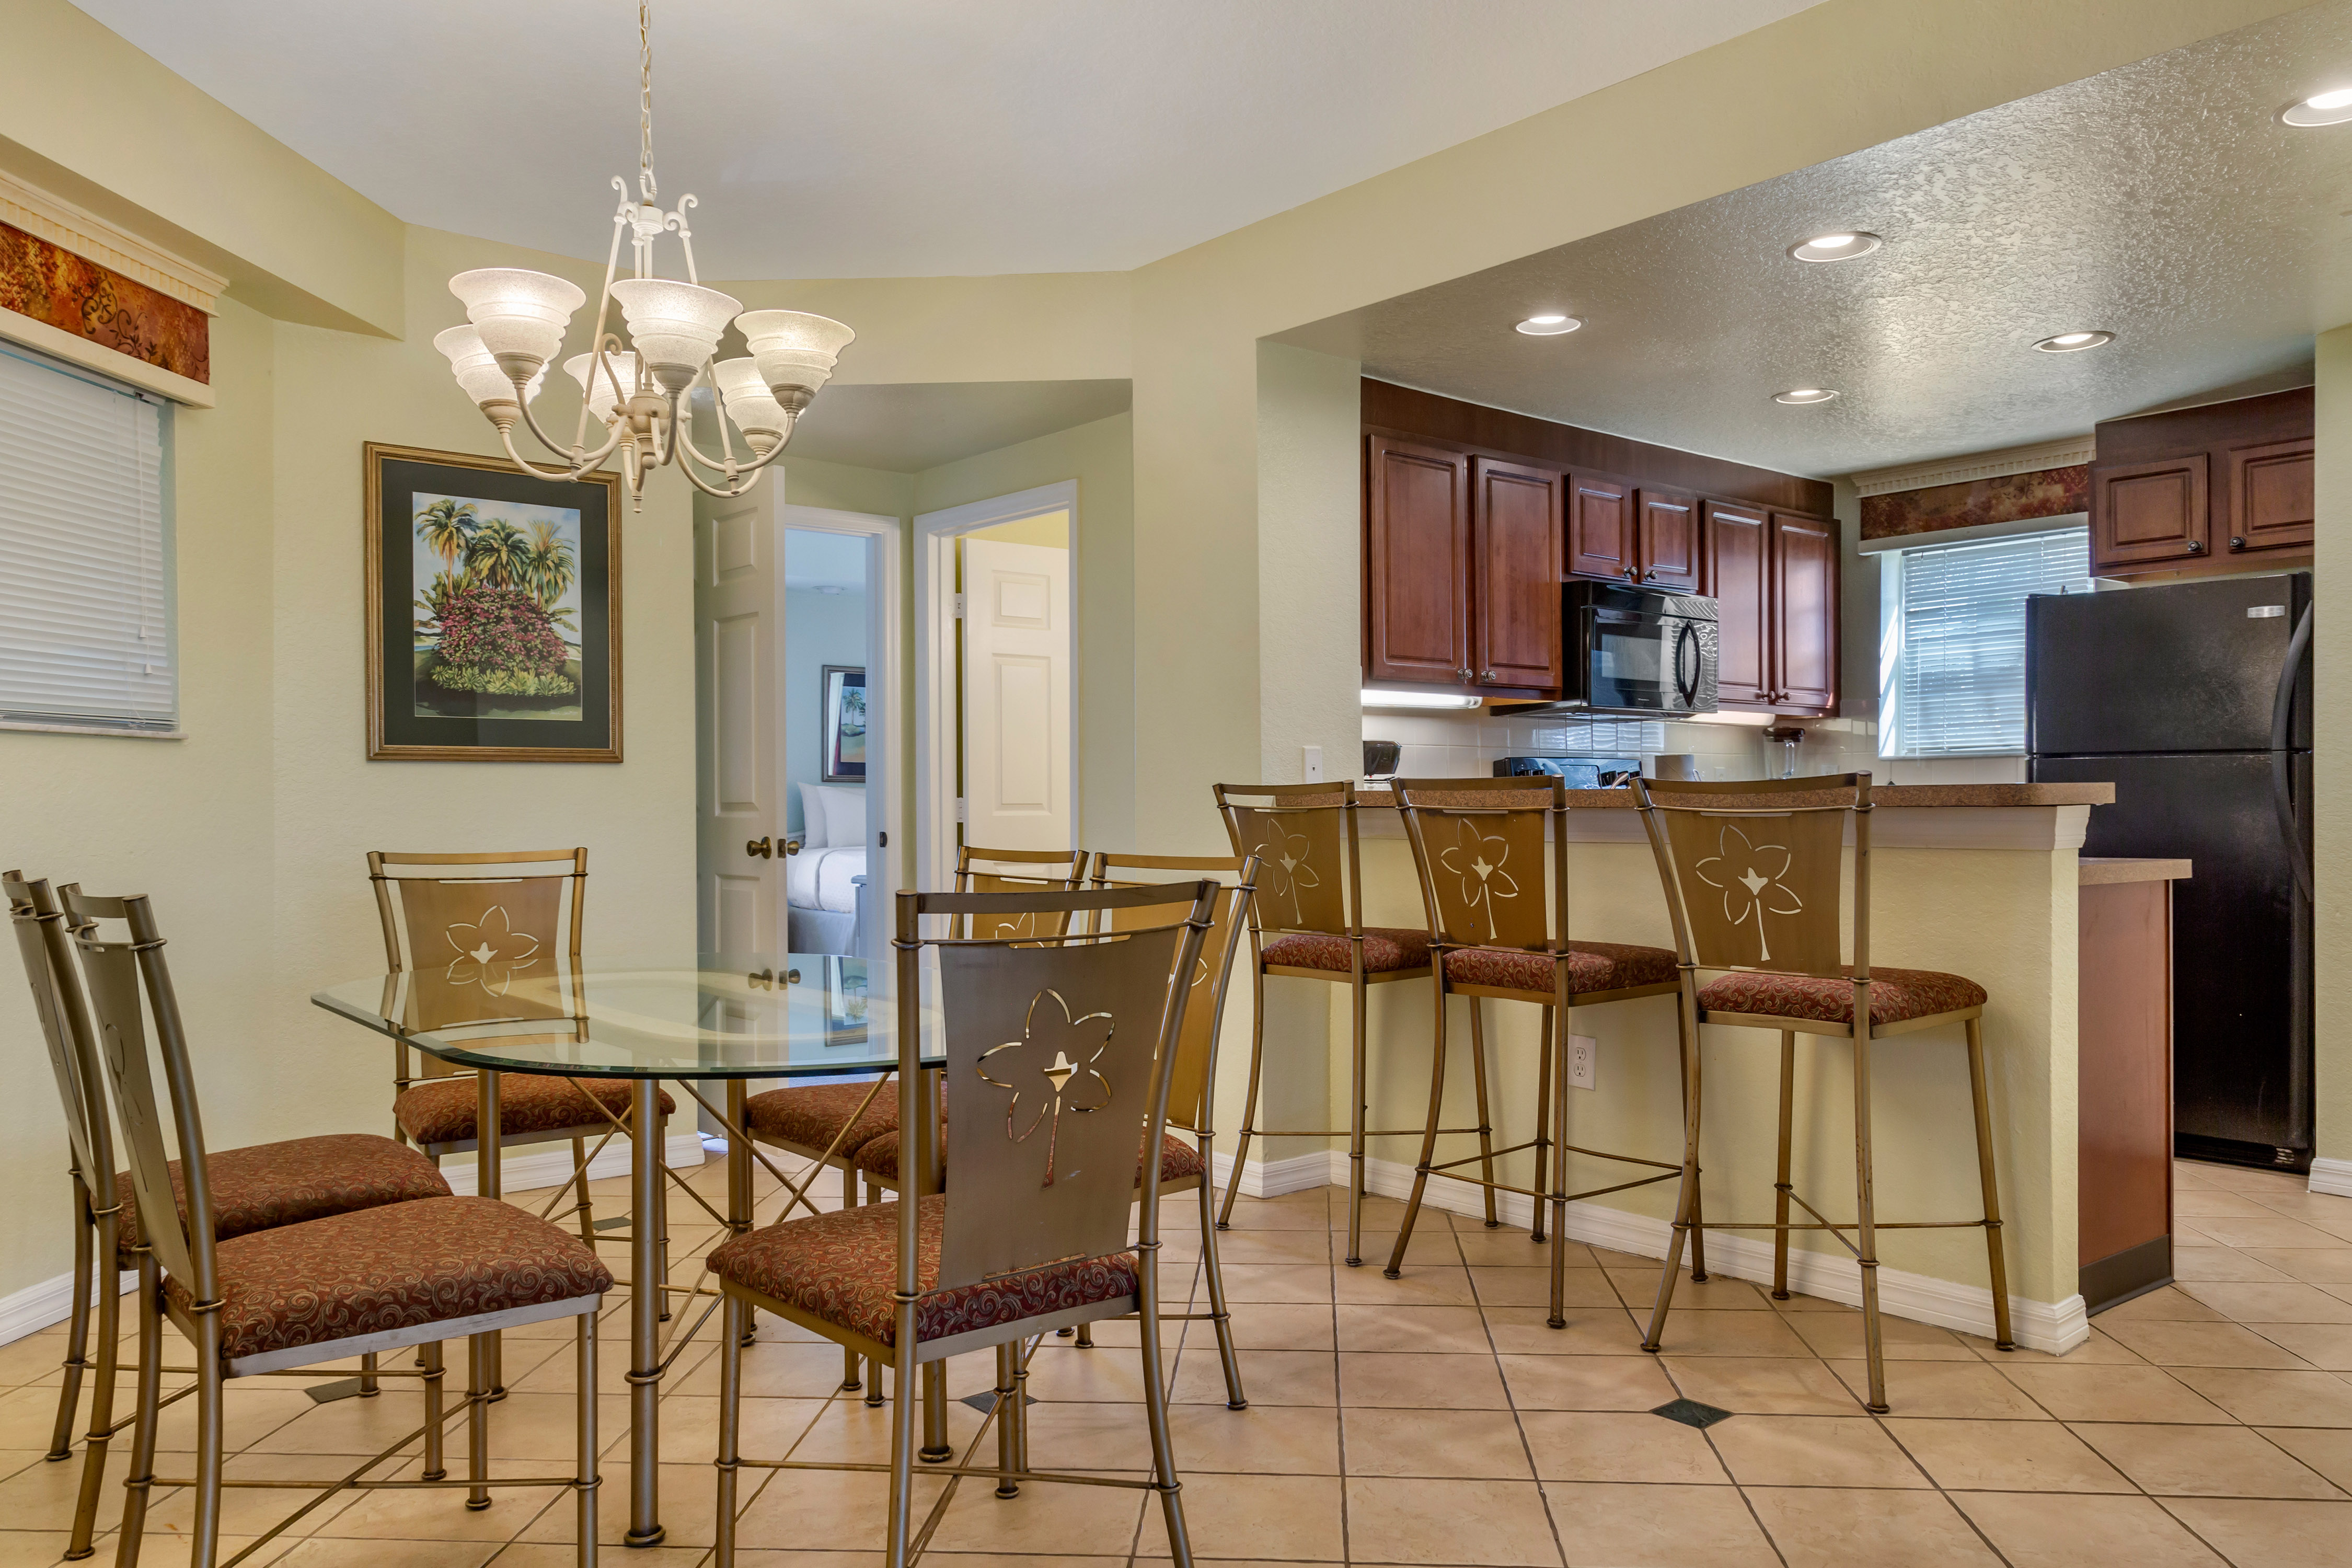 Kitchen counter and dining area with table